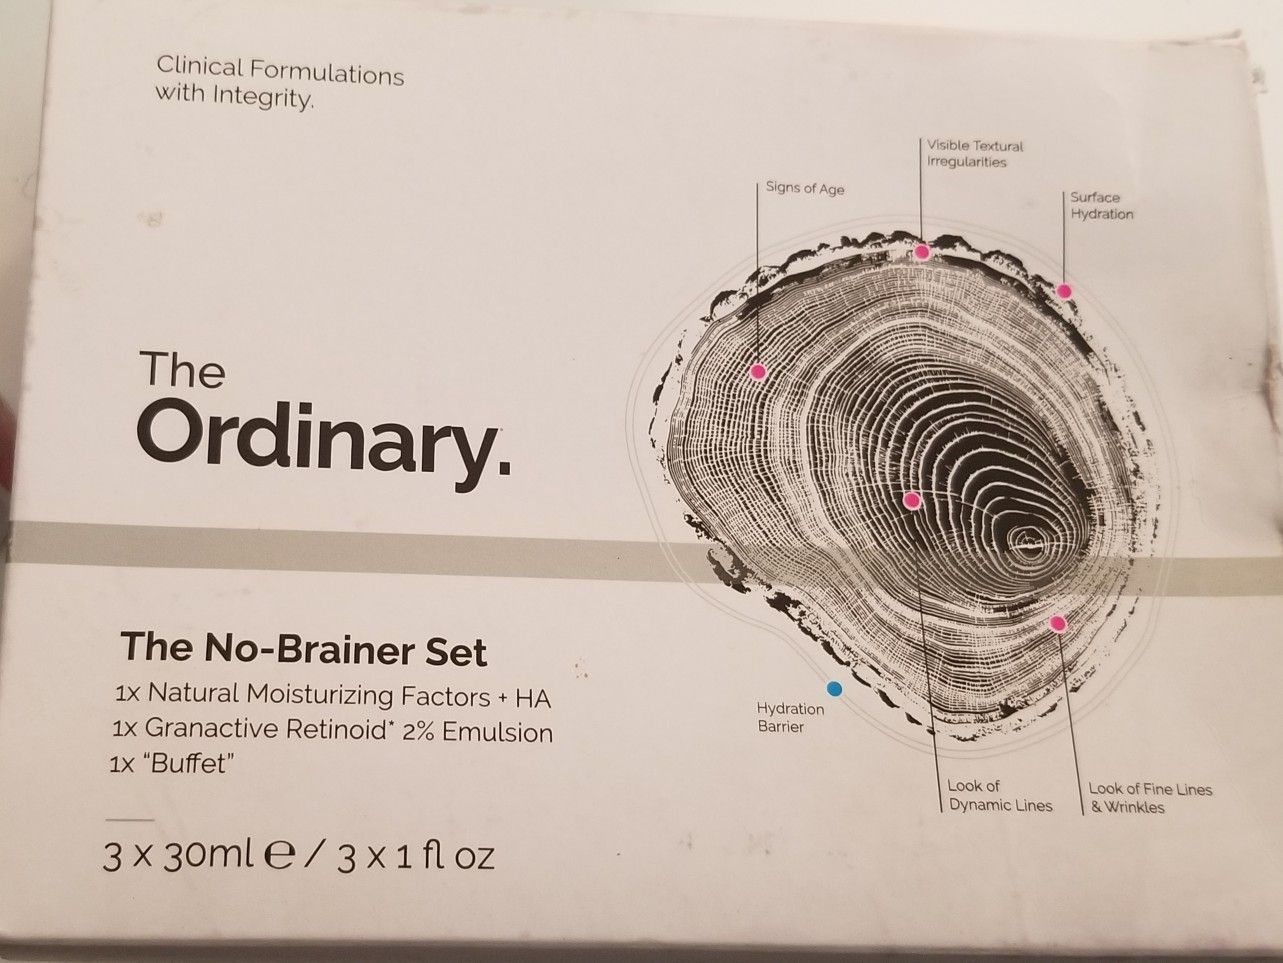 The Ordinary: The No-Brainer Set